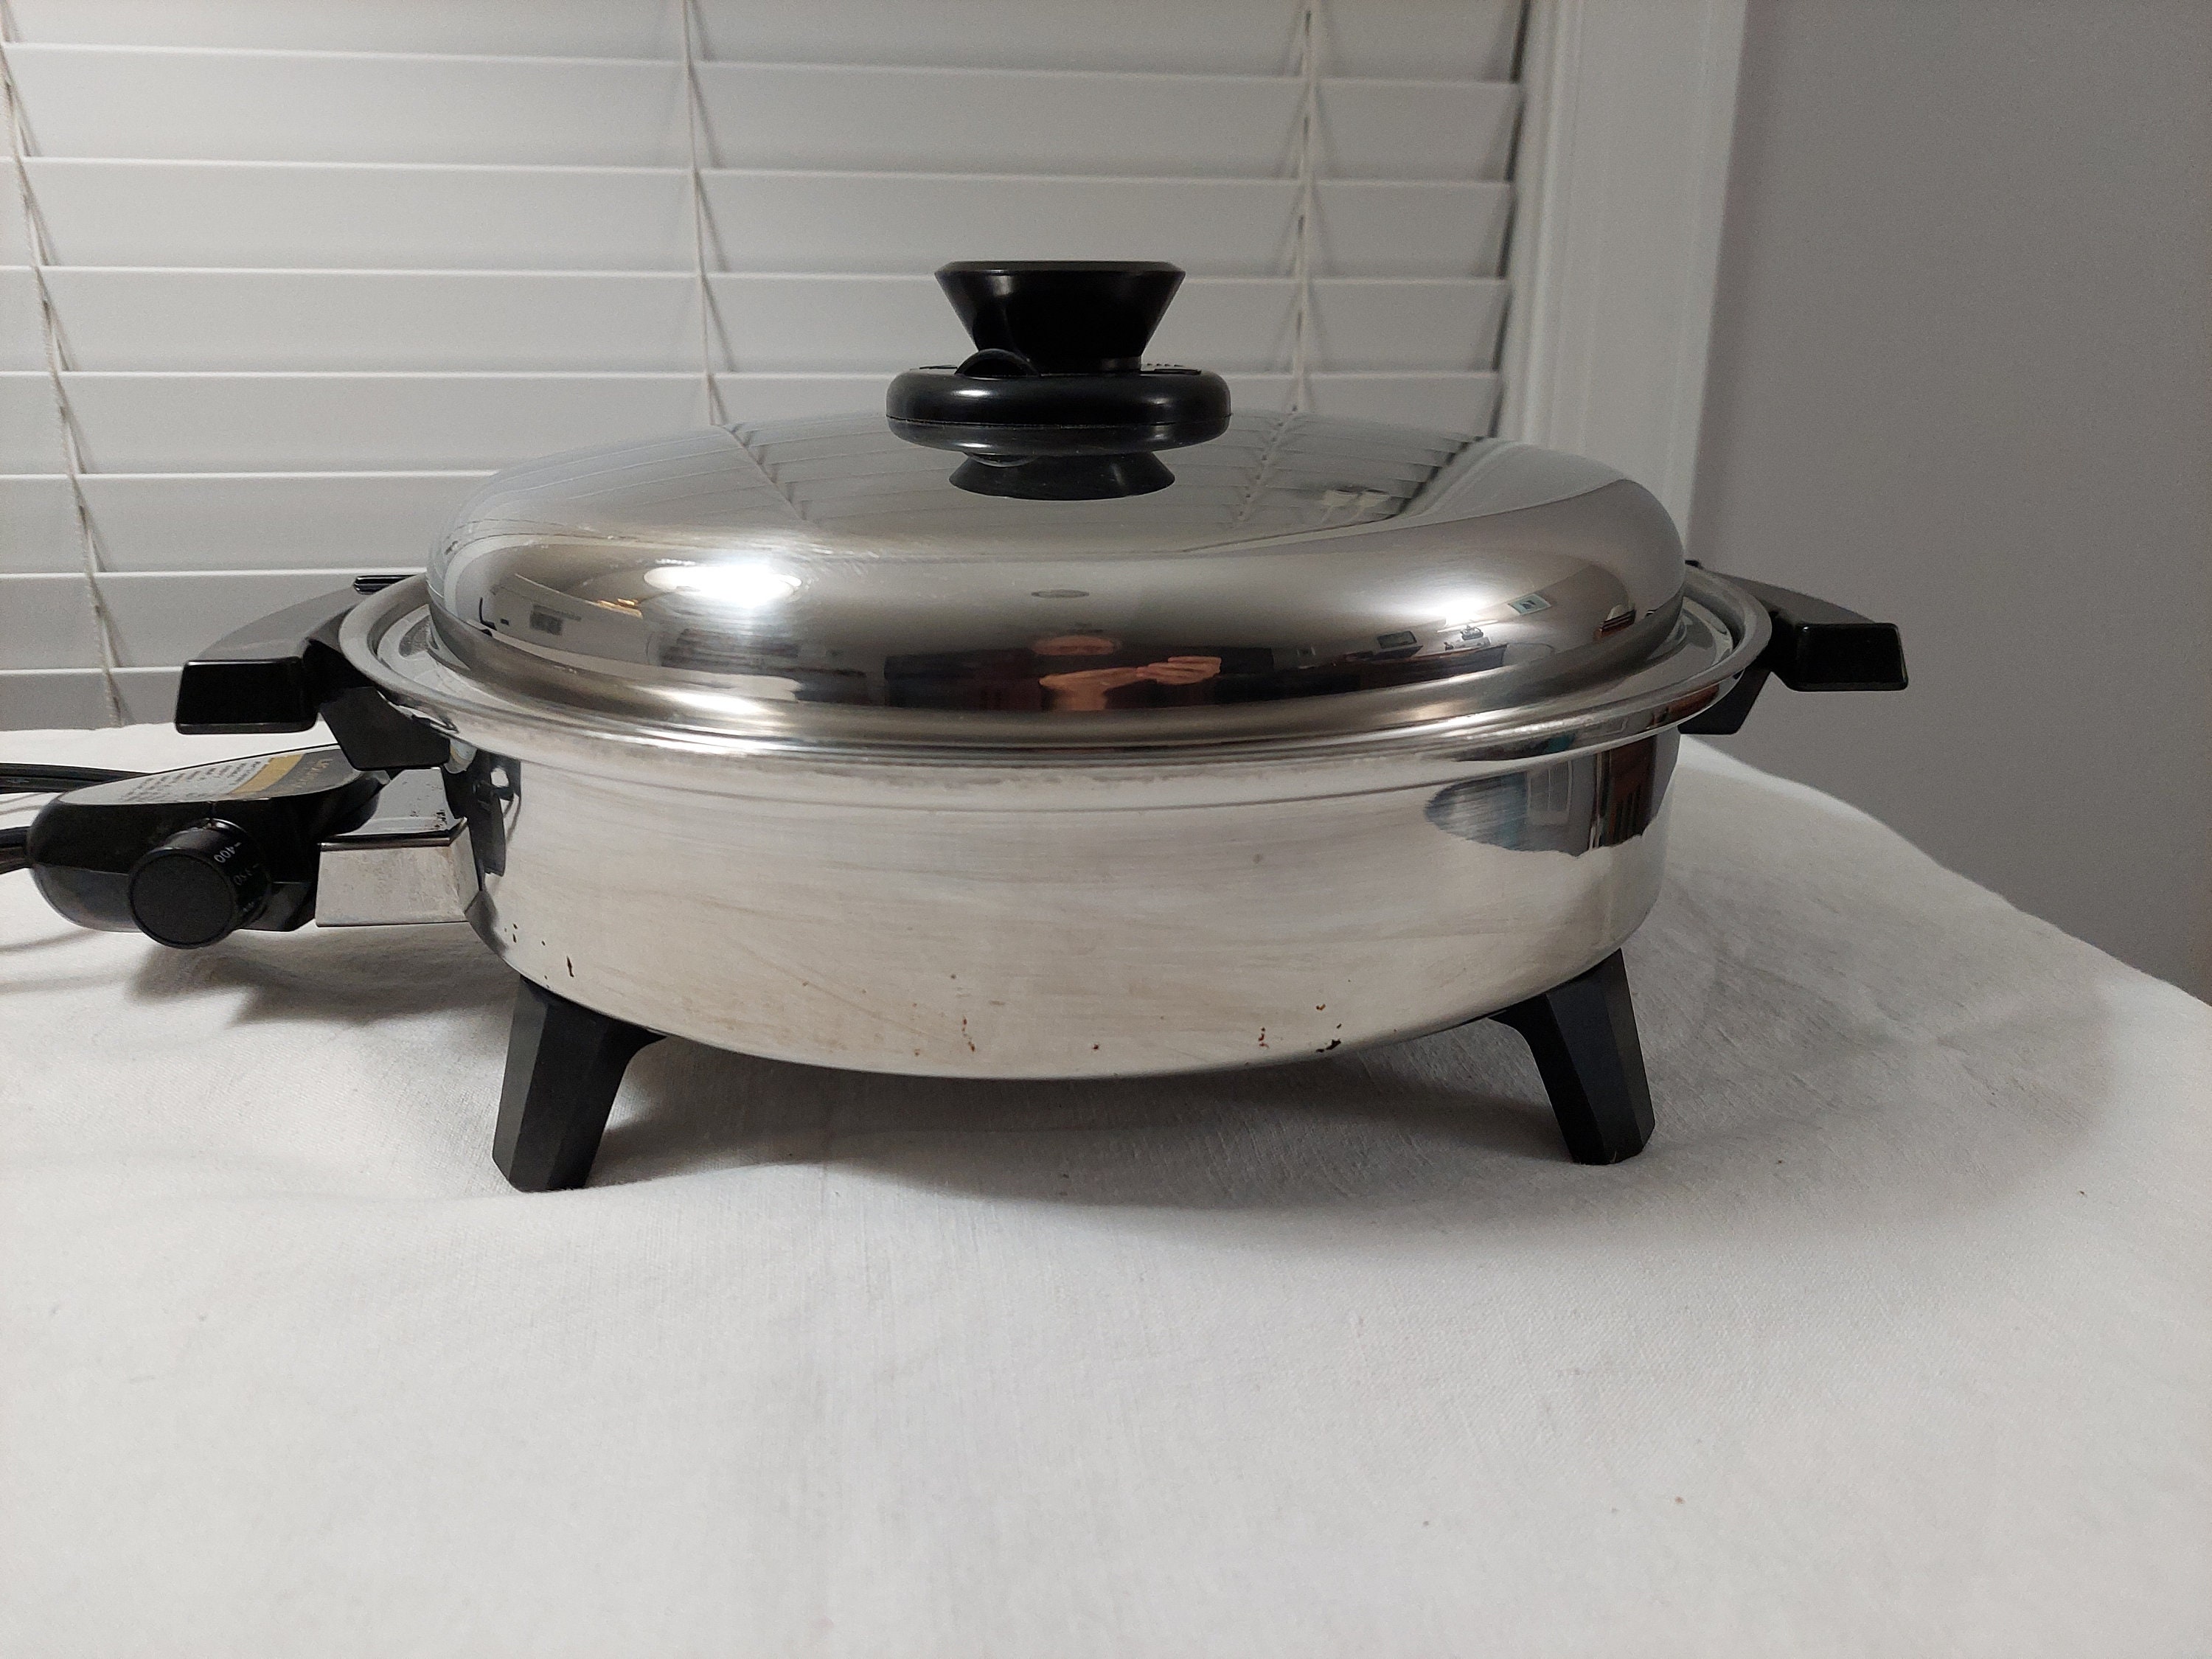 Vintage Electric Fry Pan hamilton Beach With Thermostat, Model HL29-3,  Circa 1960s, Very Good Vintage Condition. 